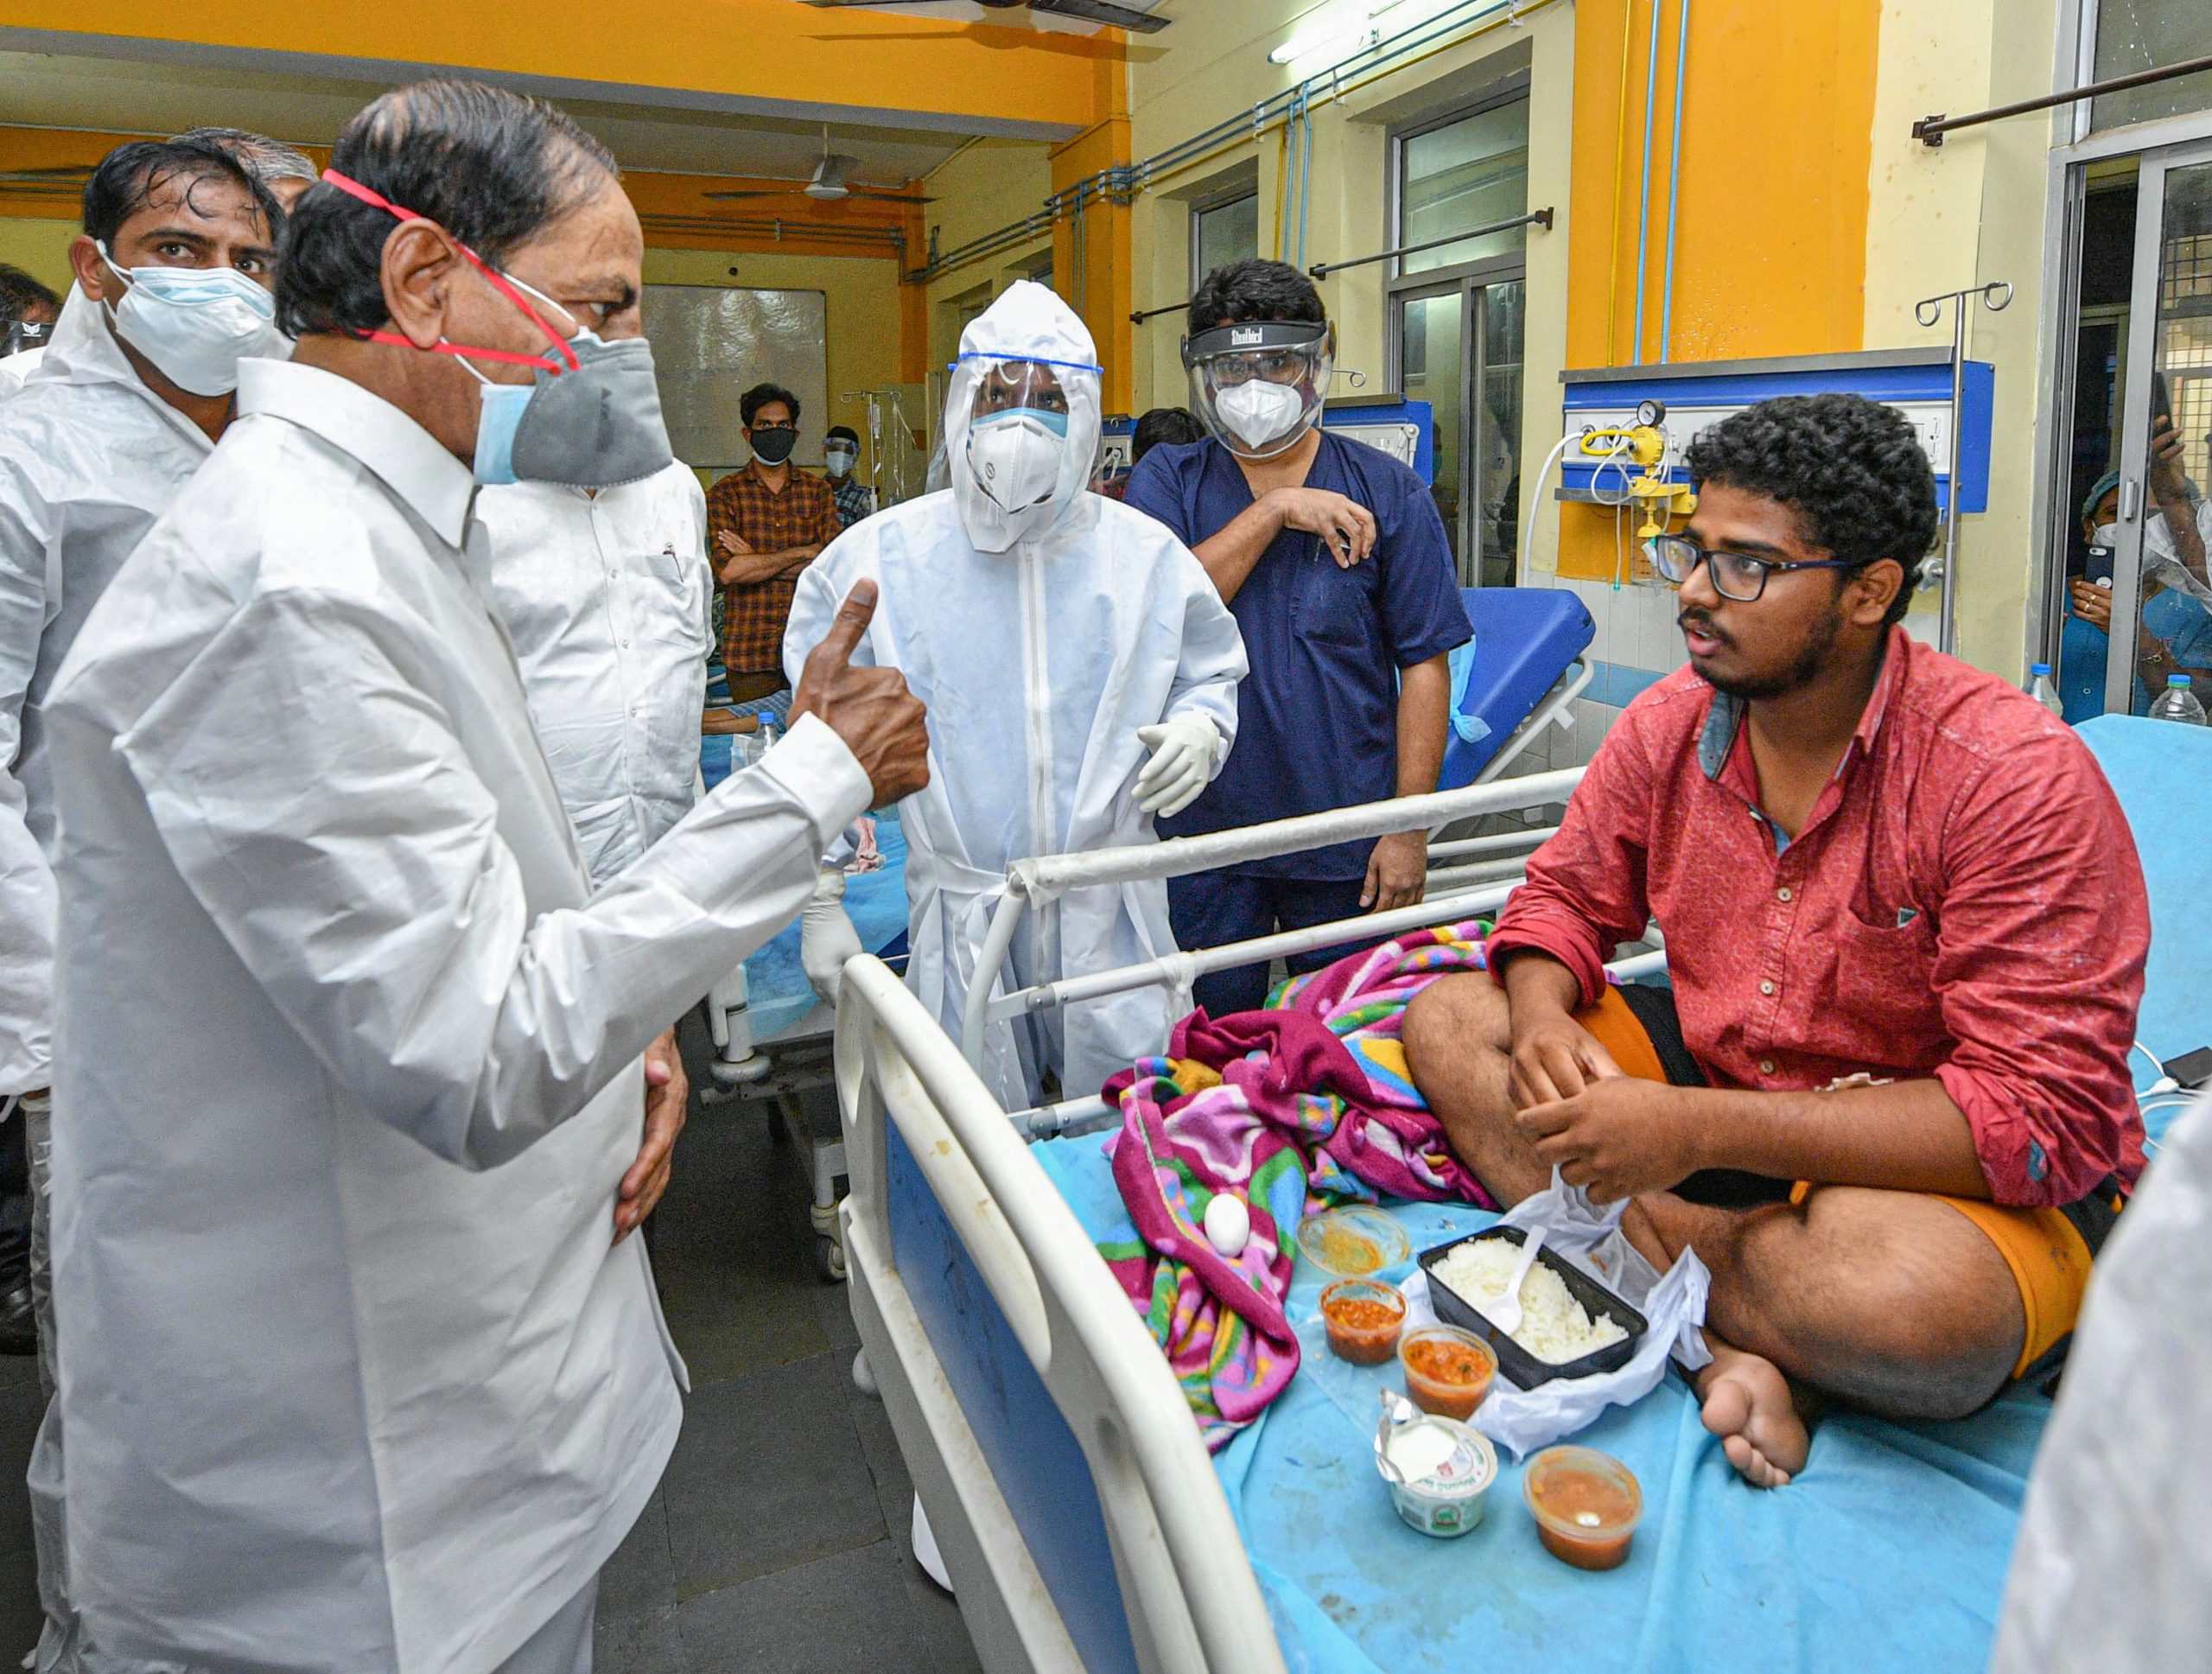 India records 276,070 new COVID-19 cases, 3,874 deaths in 24 hours